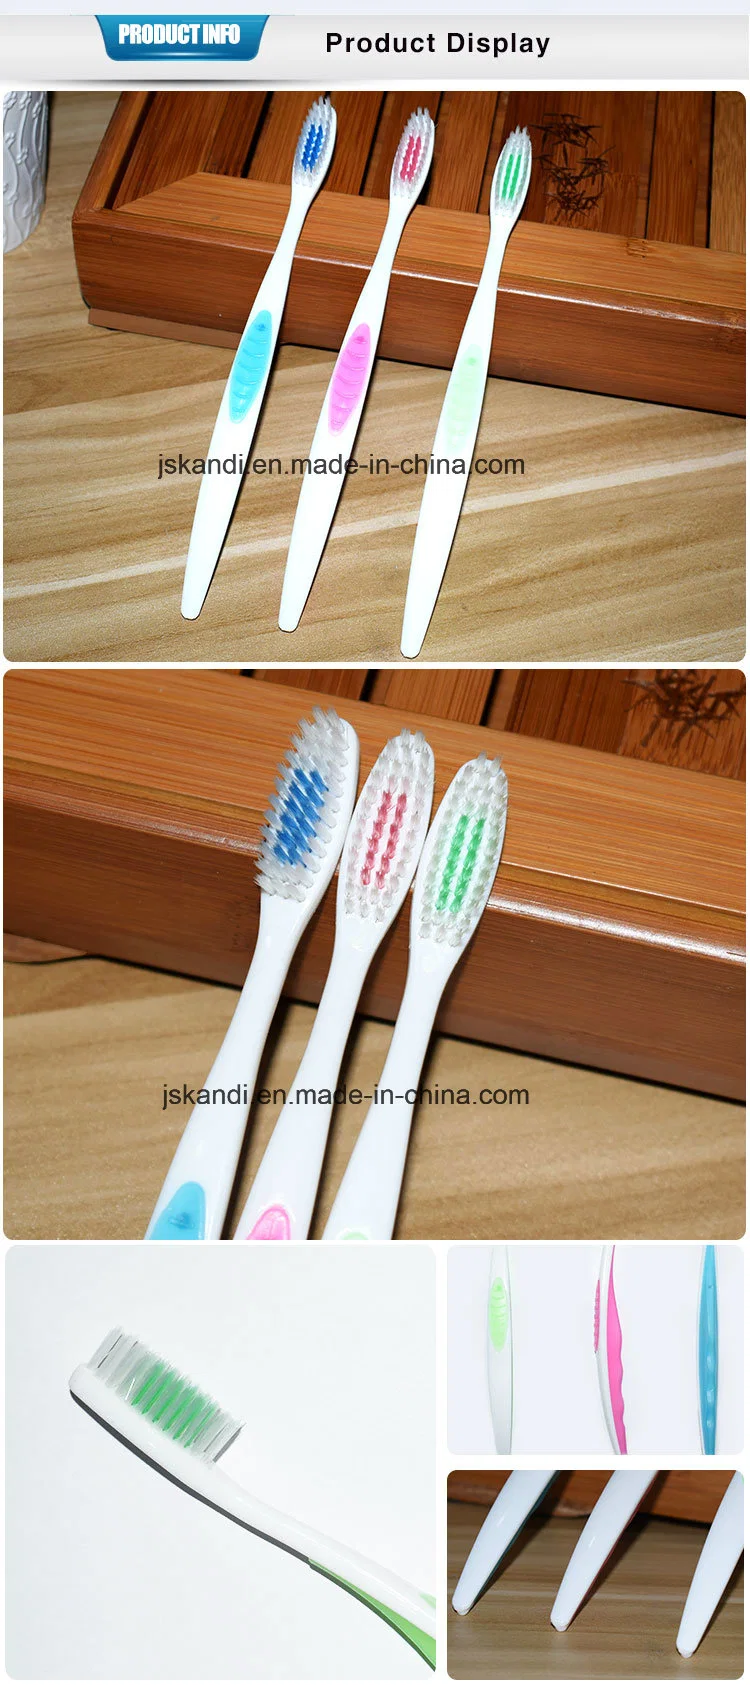 Newly Designed DuPont Bristle Adult Toothbrush Supplier